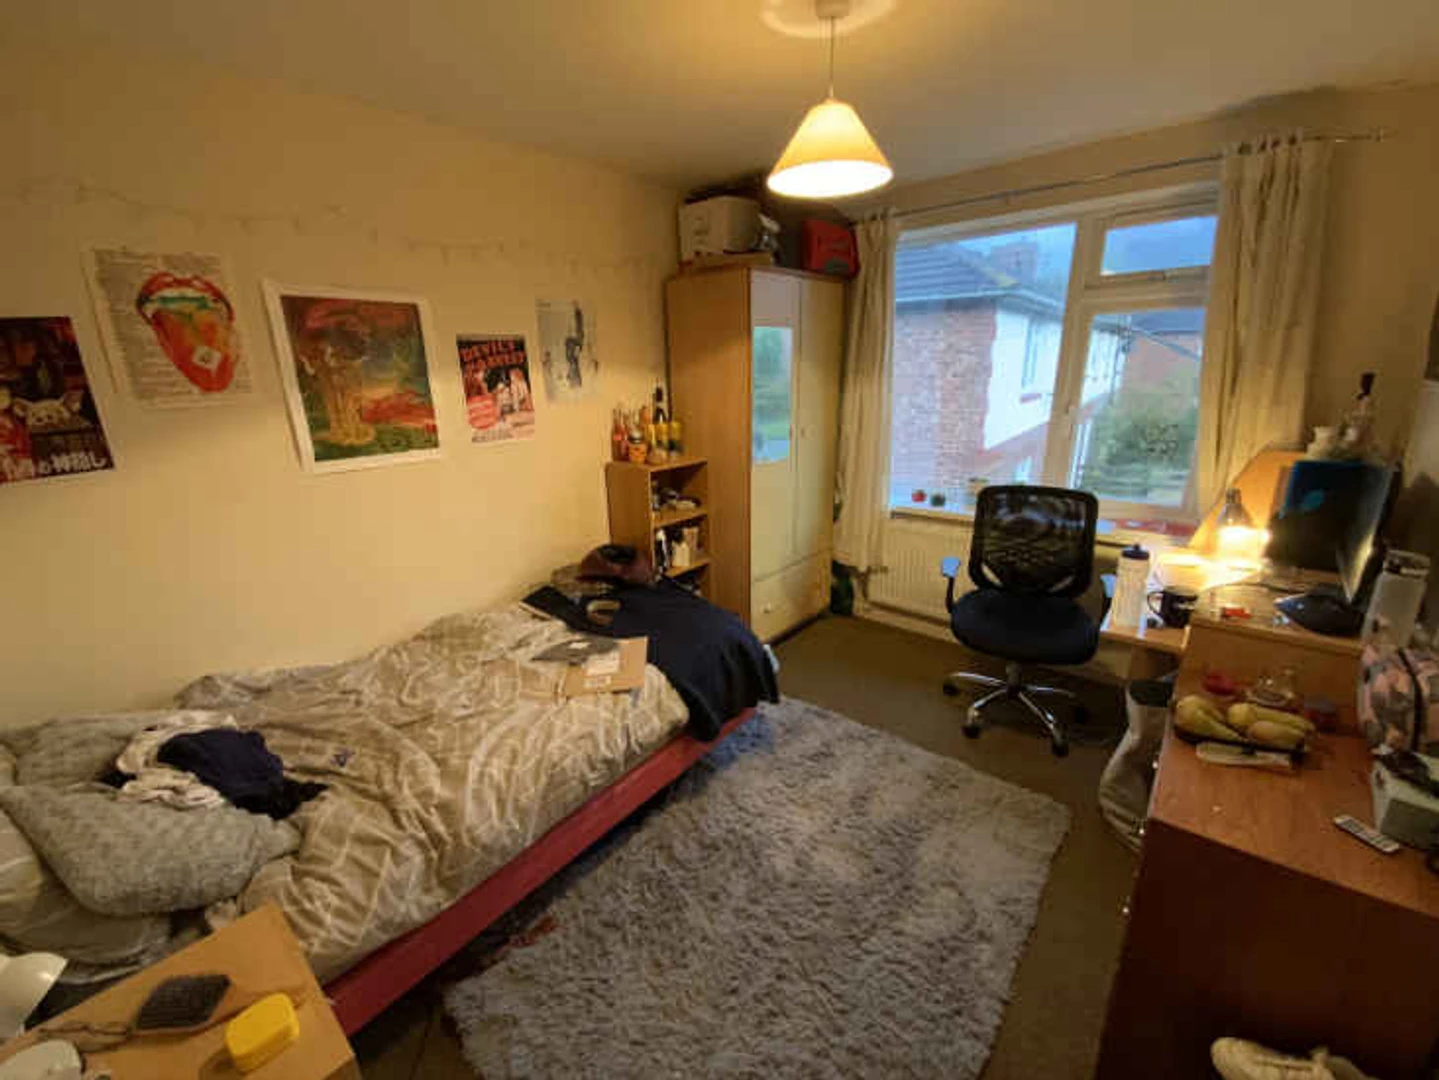 Accommodation in the centre of Durham